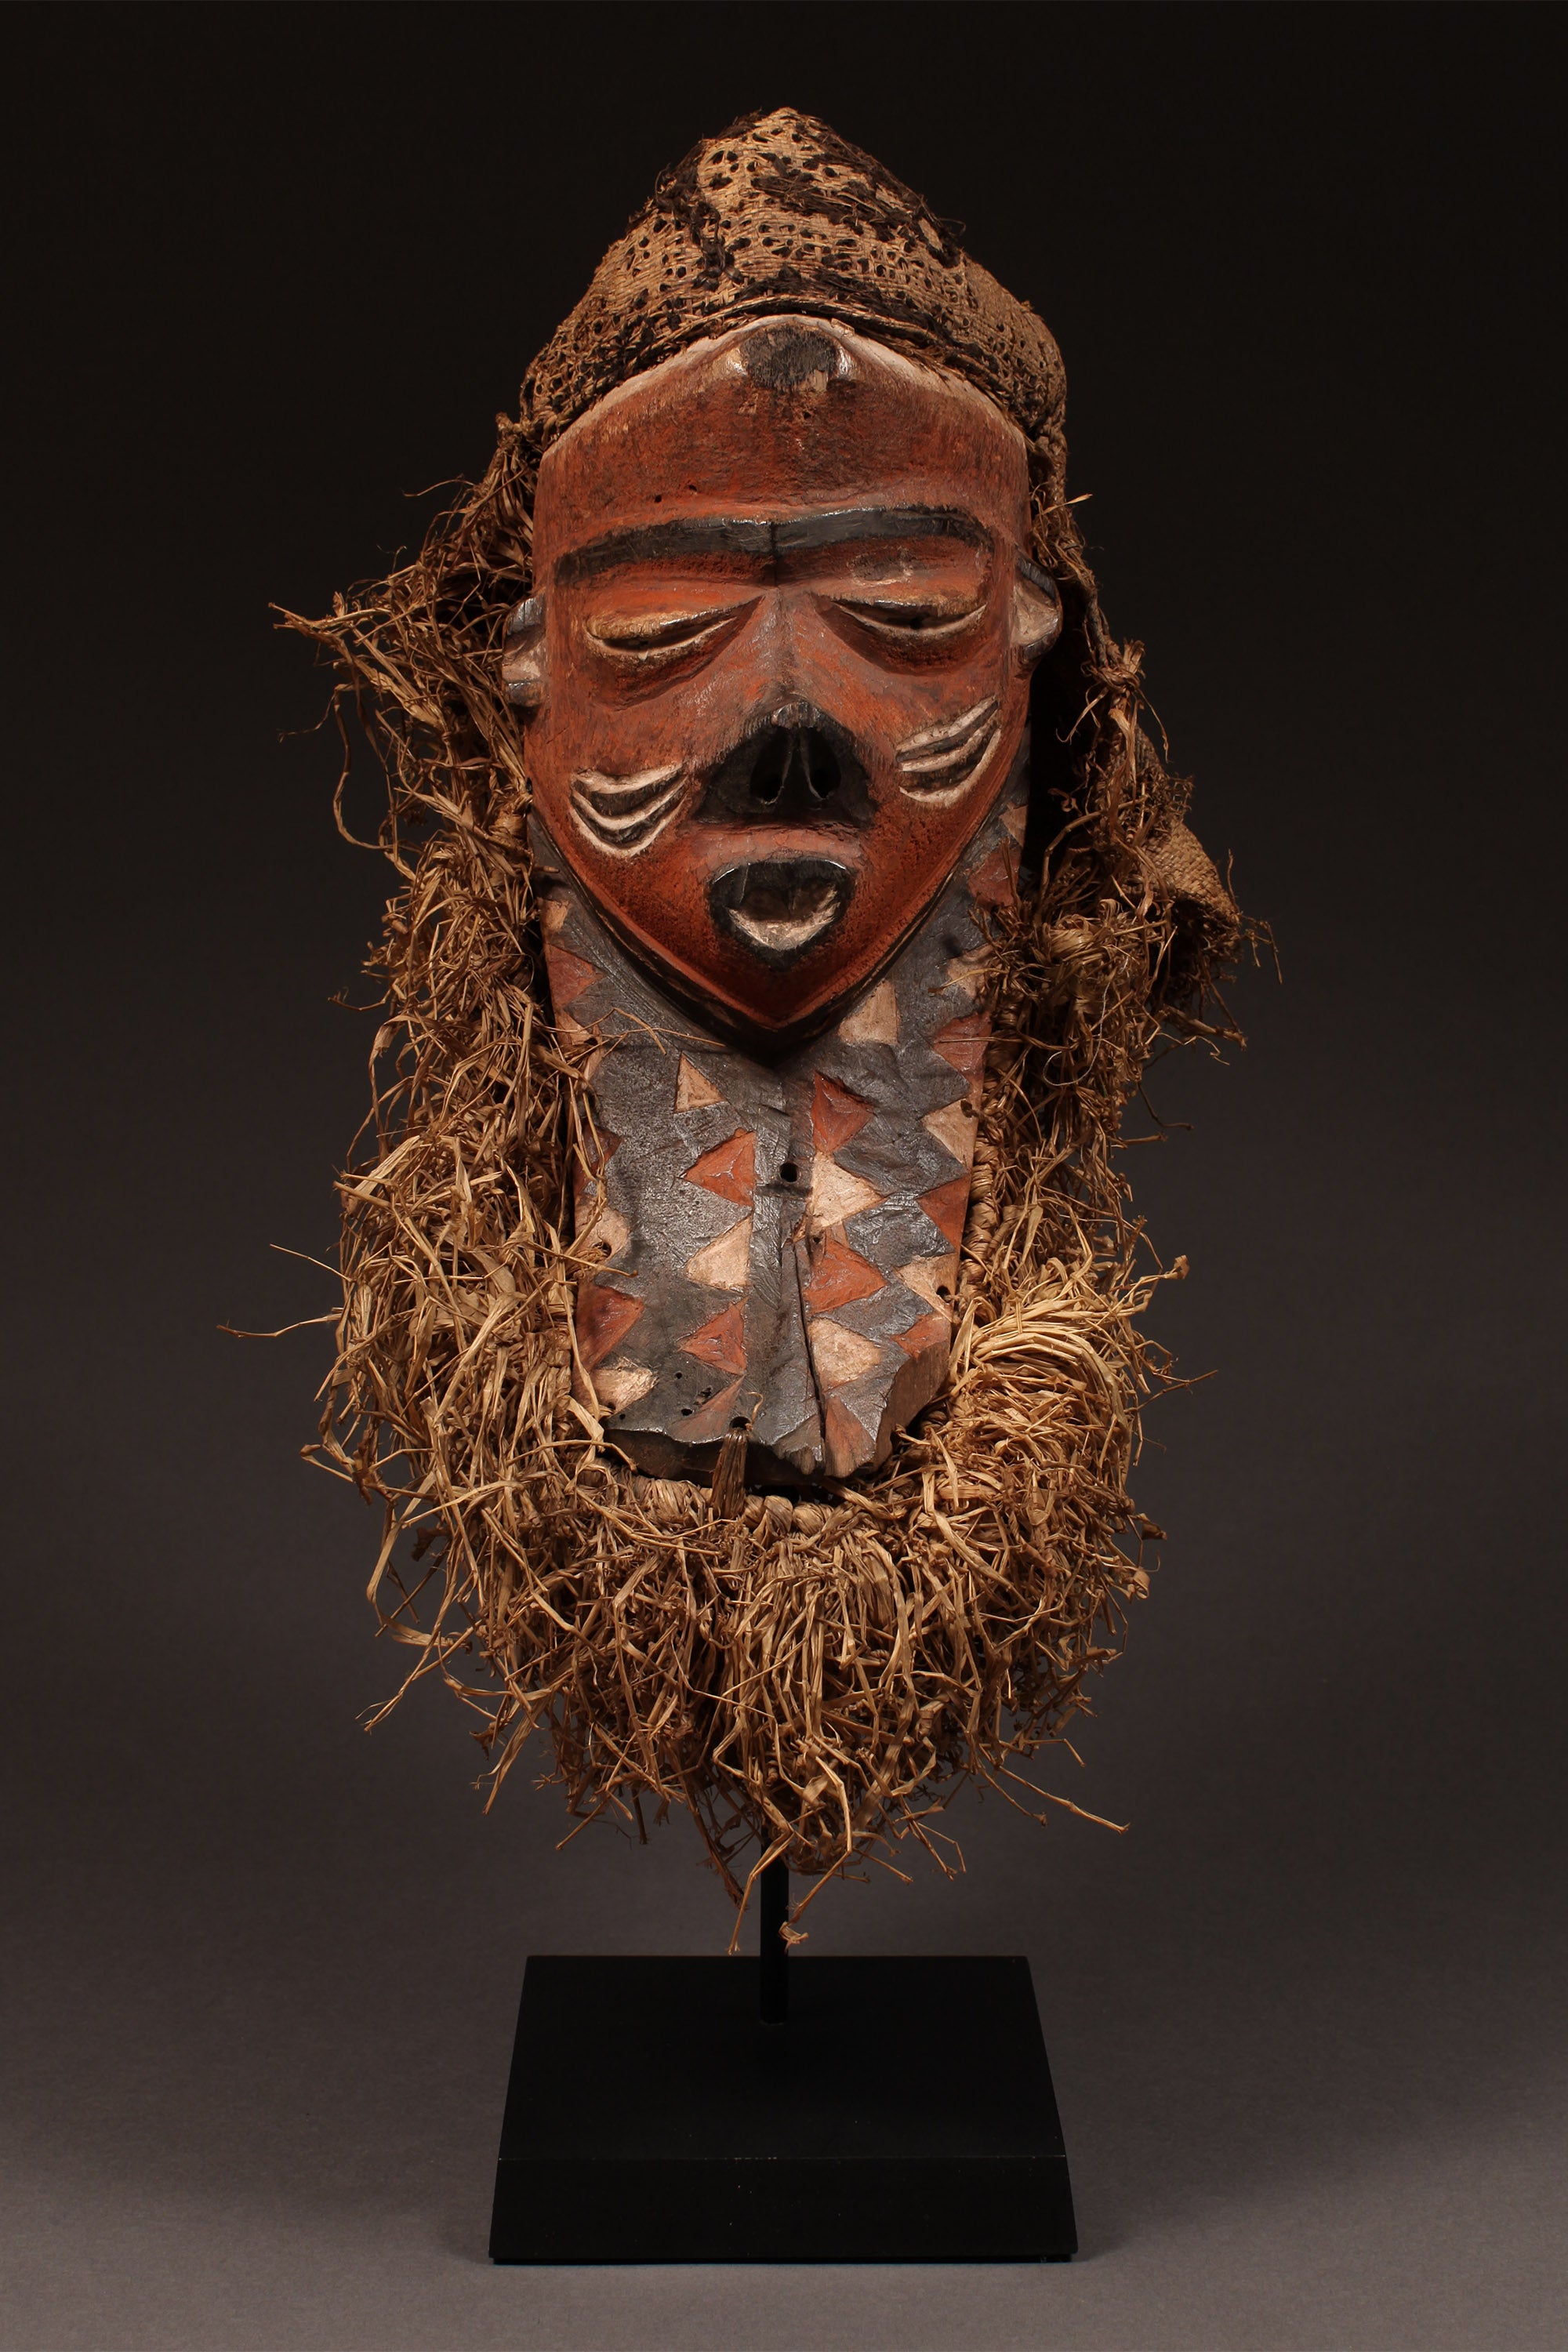 Tribal Masks - Traditional - Folk Art - African - Objects - Artifacts - Sculptures - Collectible - Unique Artistry - Culture - Pende Tribe - Beautiful Forehead - Crafted Wood - Traditional Modern - Heritage D. R Congo